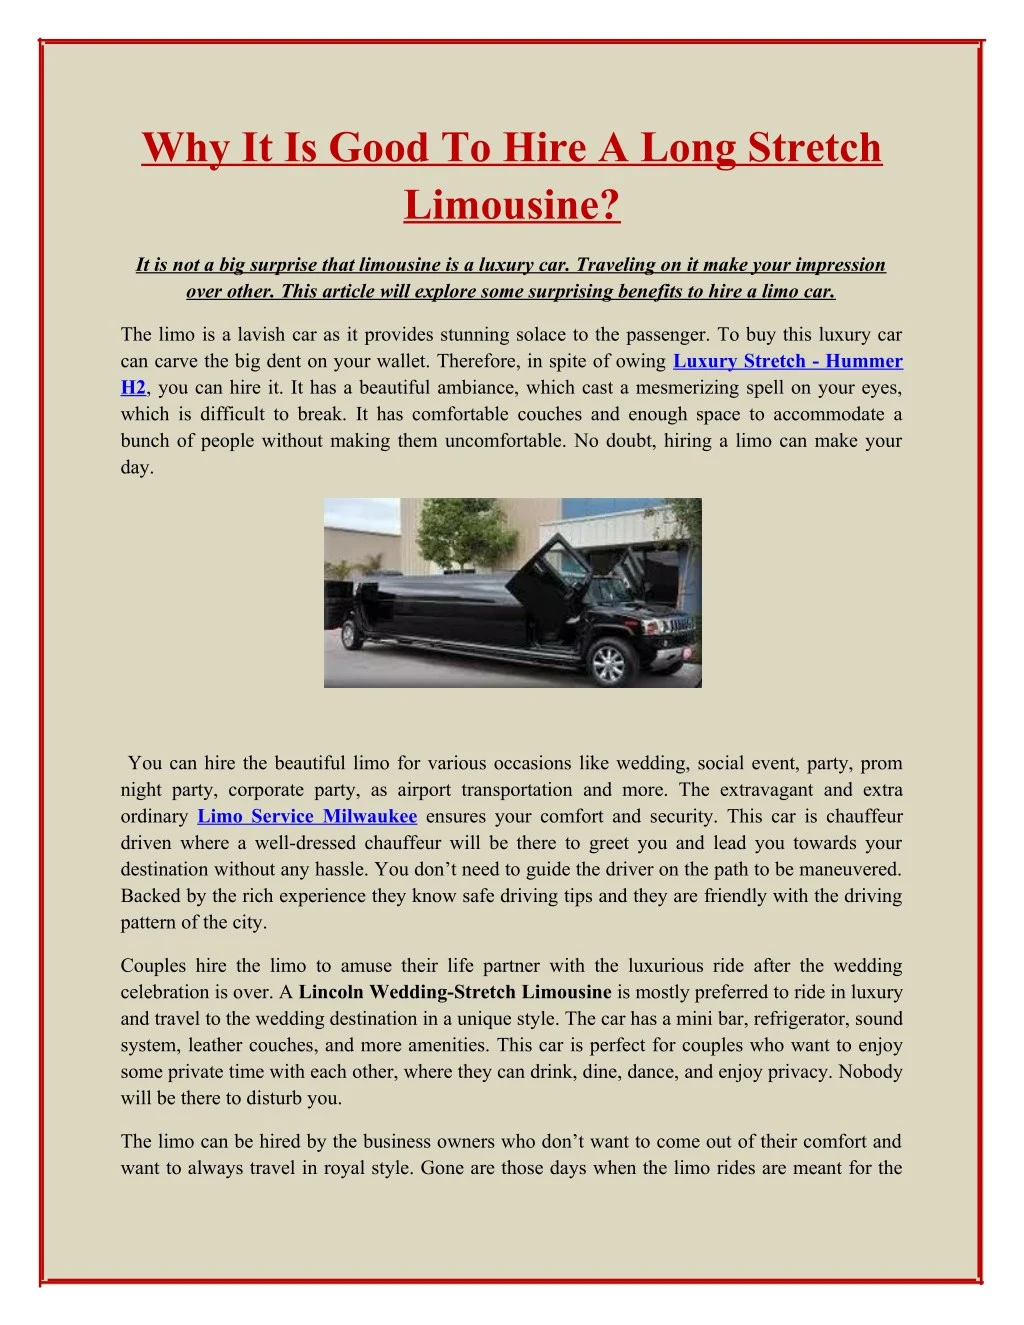 why it is good to hire a long stretch limousine